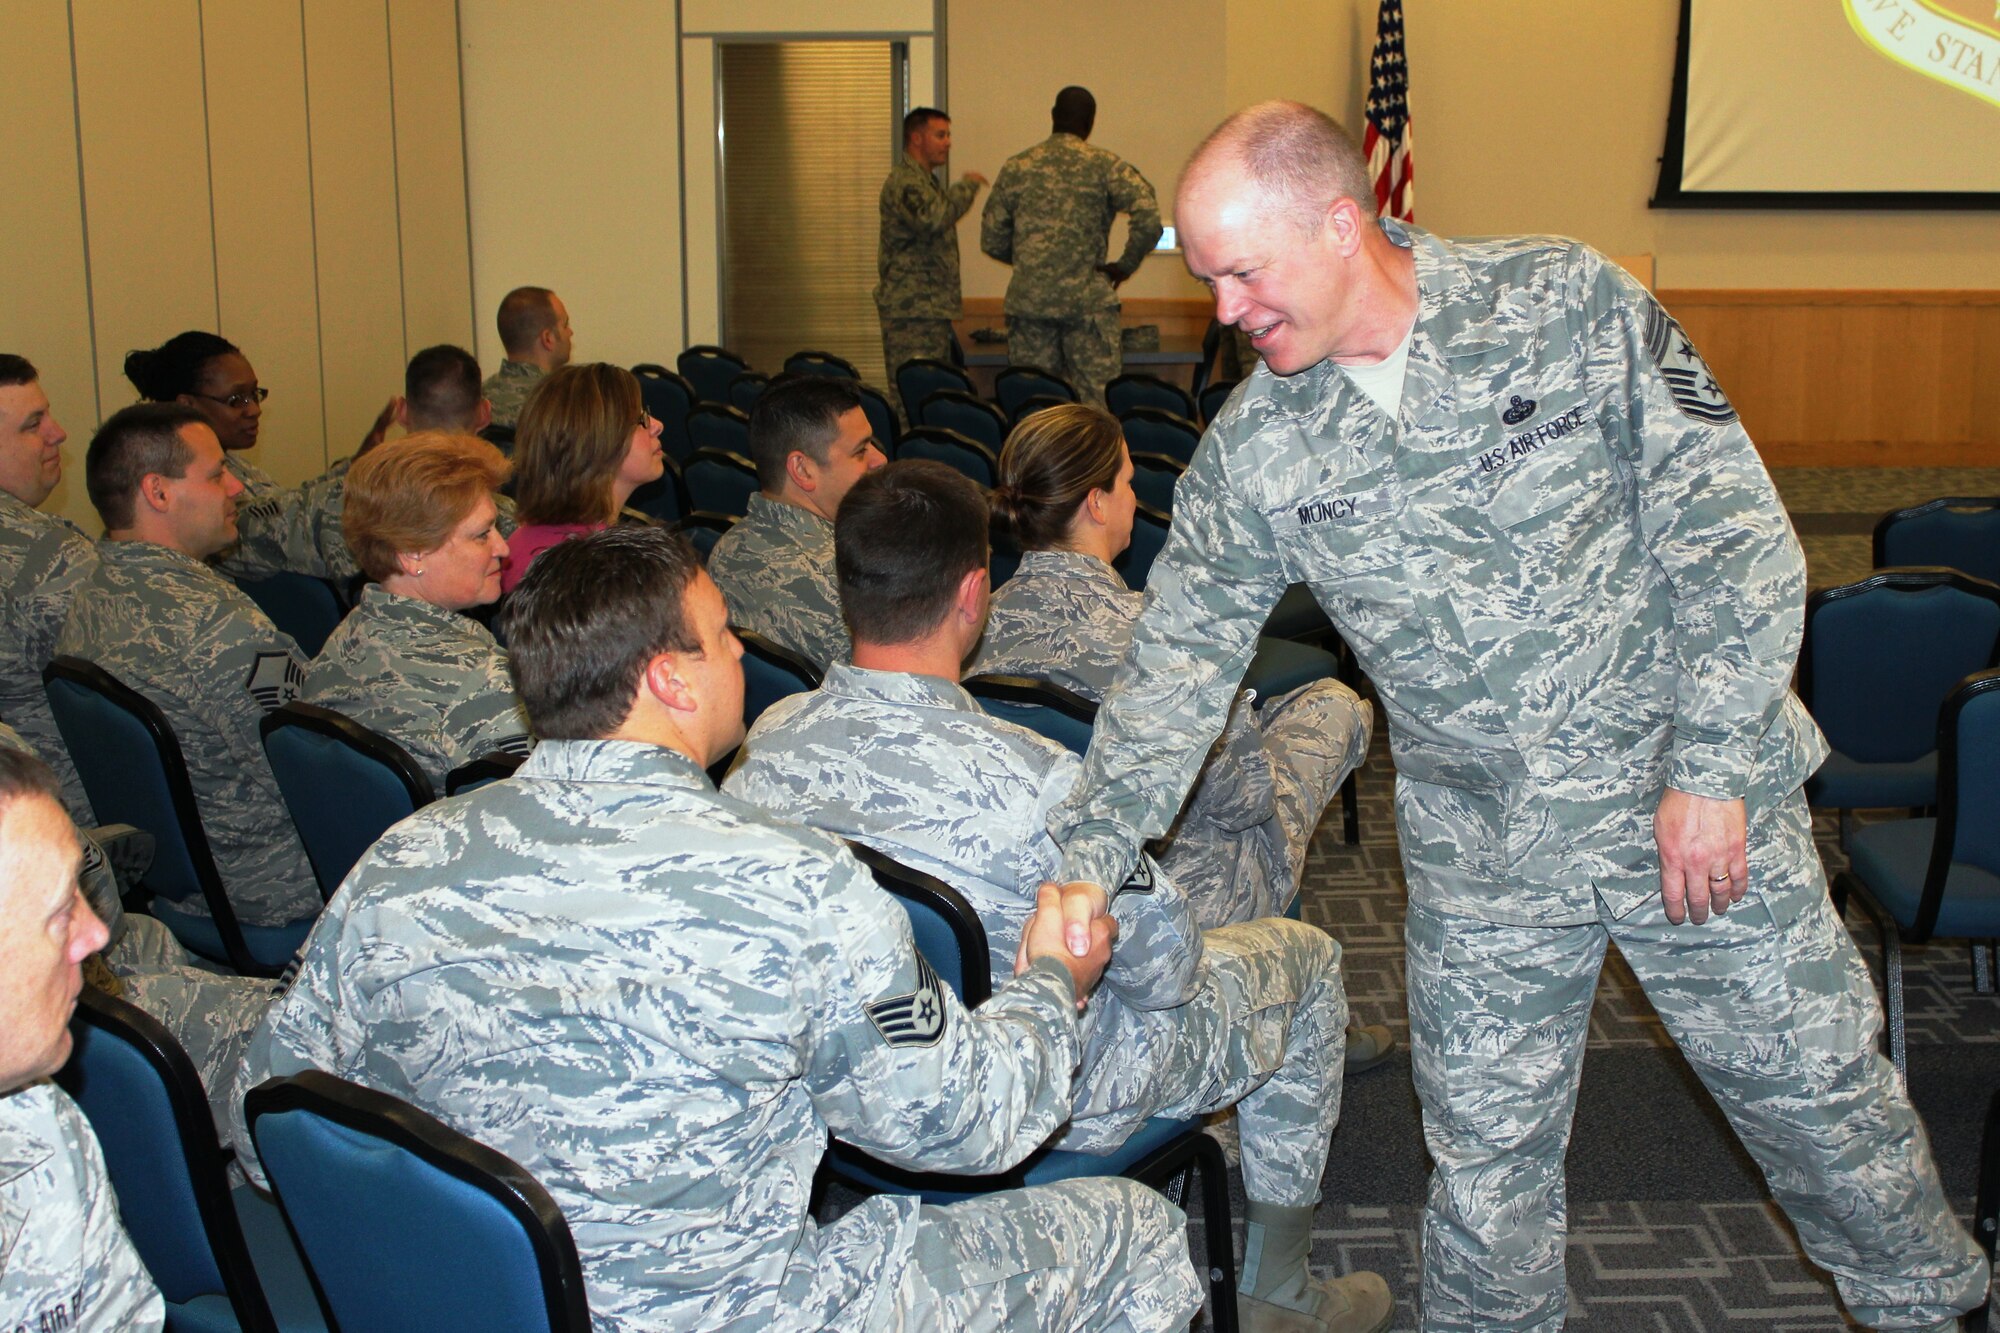 Chief Master Sgt. Christopher Muncy shakes hands with members of the 127th Wing at Selfridge Air National Guard Base, Mich., May 19, 2012. Muncy is the command chief for the Air National Guard. He was visiting ANG facilities in Michigan during the May Unit Training Assembly, when members of the Air Guard report for duty at their respective training locations. (U.S. Air Force photo by TSgt. Dan Heaton)